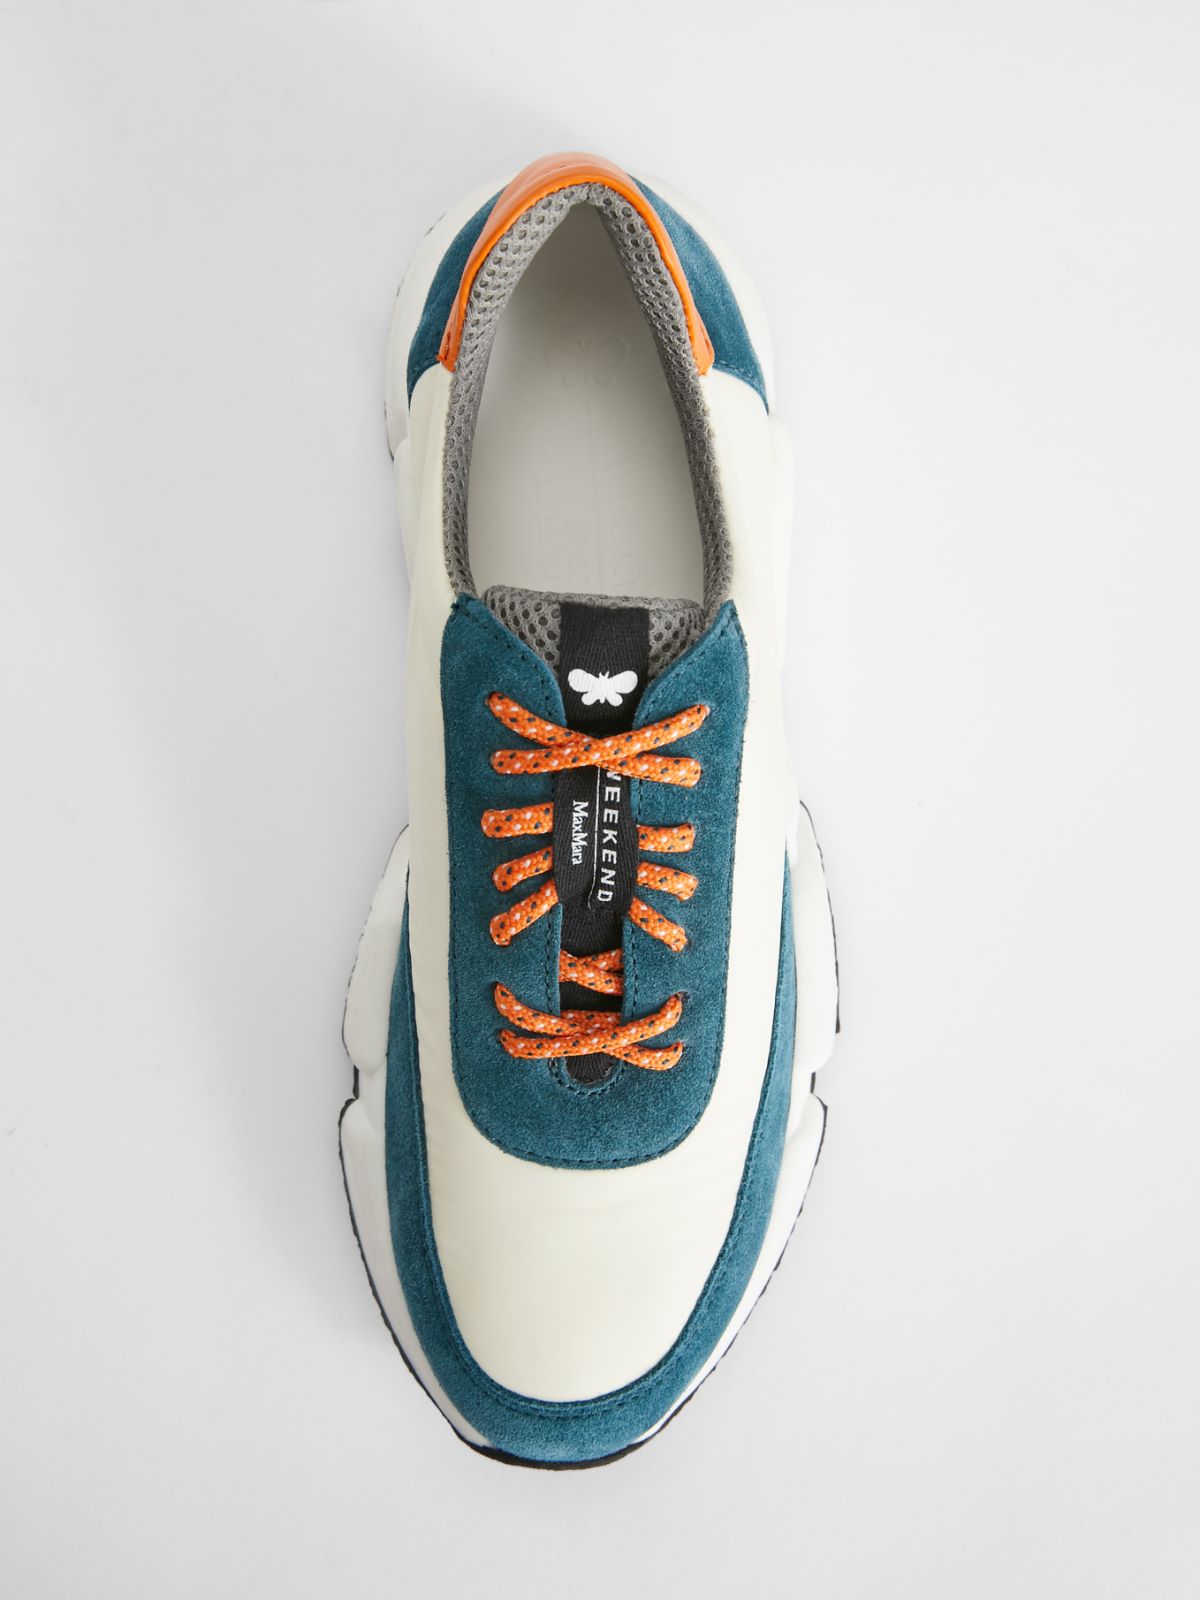 Leather nylon and suede trainers Weekend Maxmara